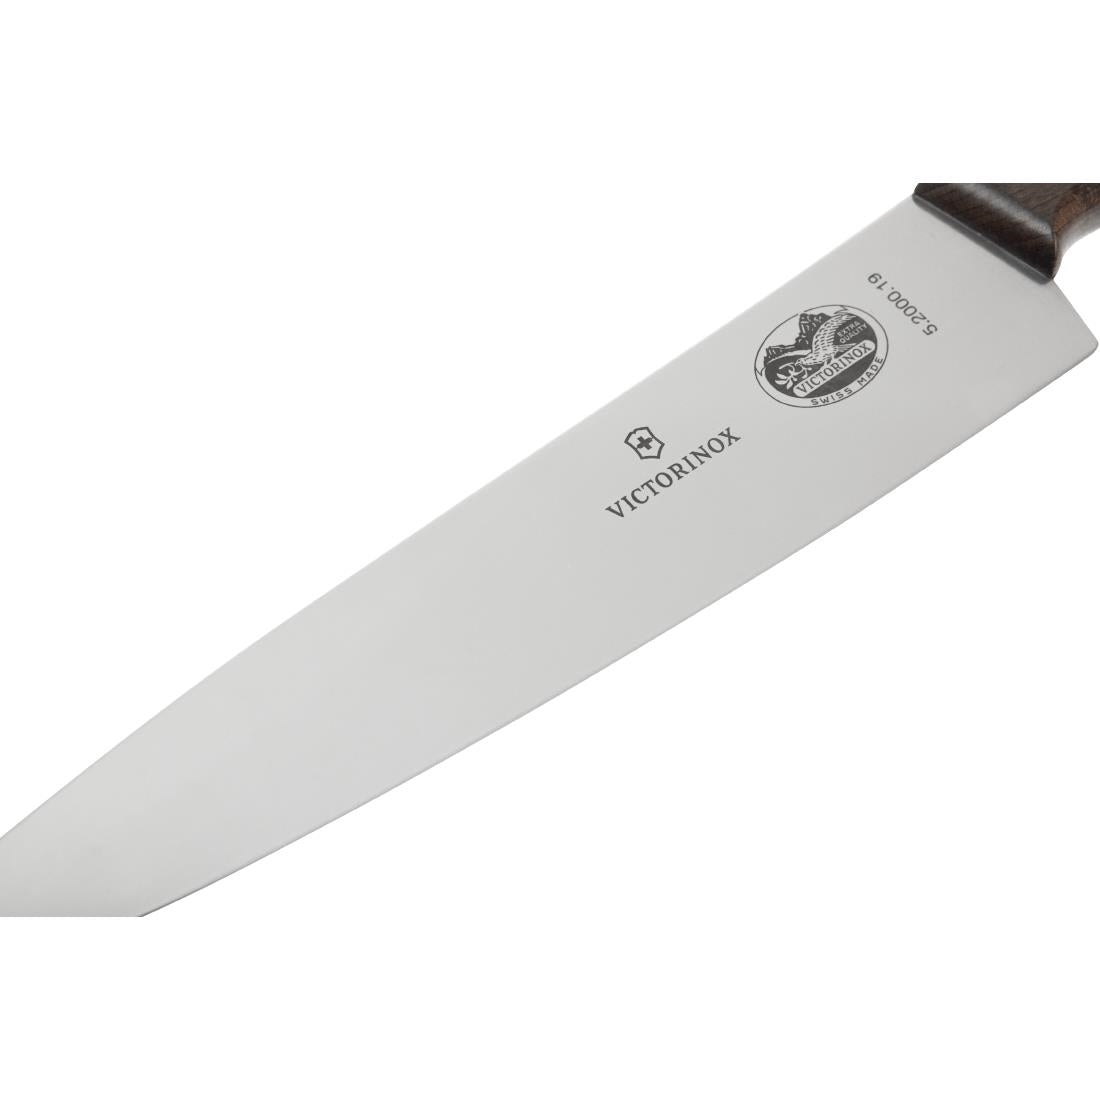 DP583 Victorinox Wooden Handled Carving Knife 19cm JD Catering Equipment Solutions Ltd